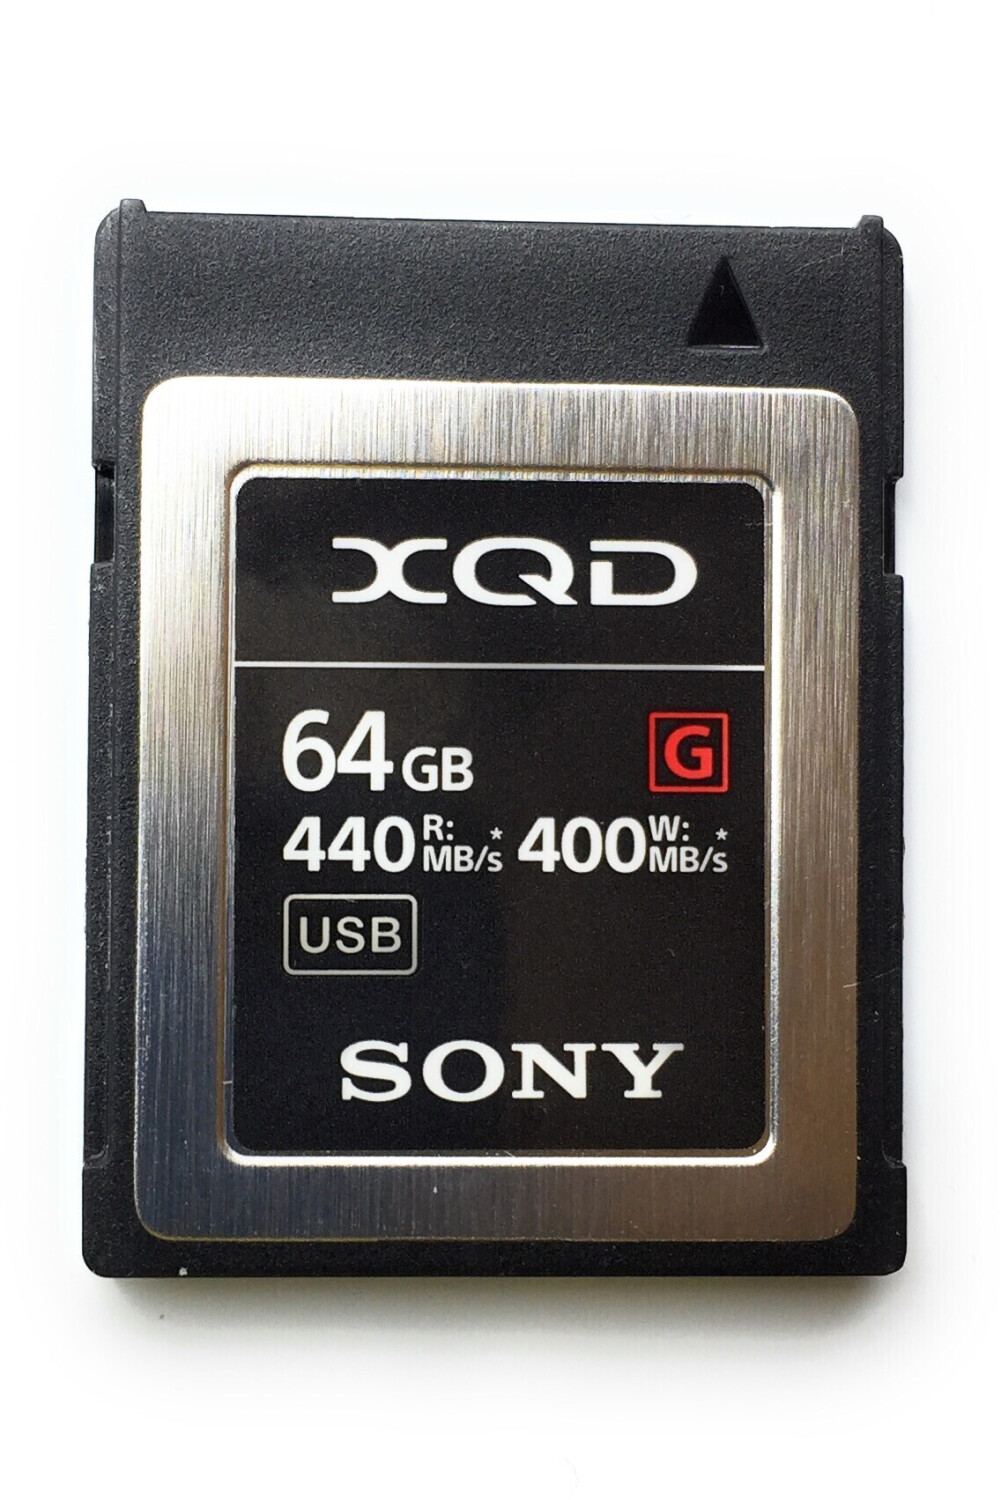 Buy Sony XQD G Series 64GB (QDG64E) from £119.00 (Today) – Best Deals